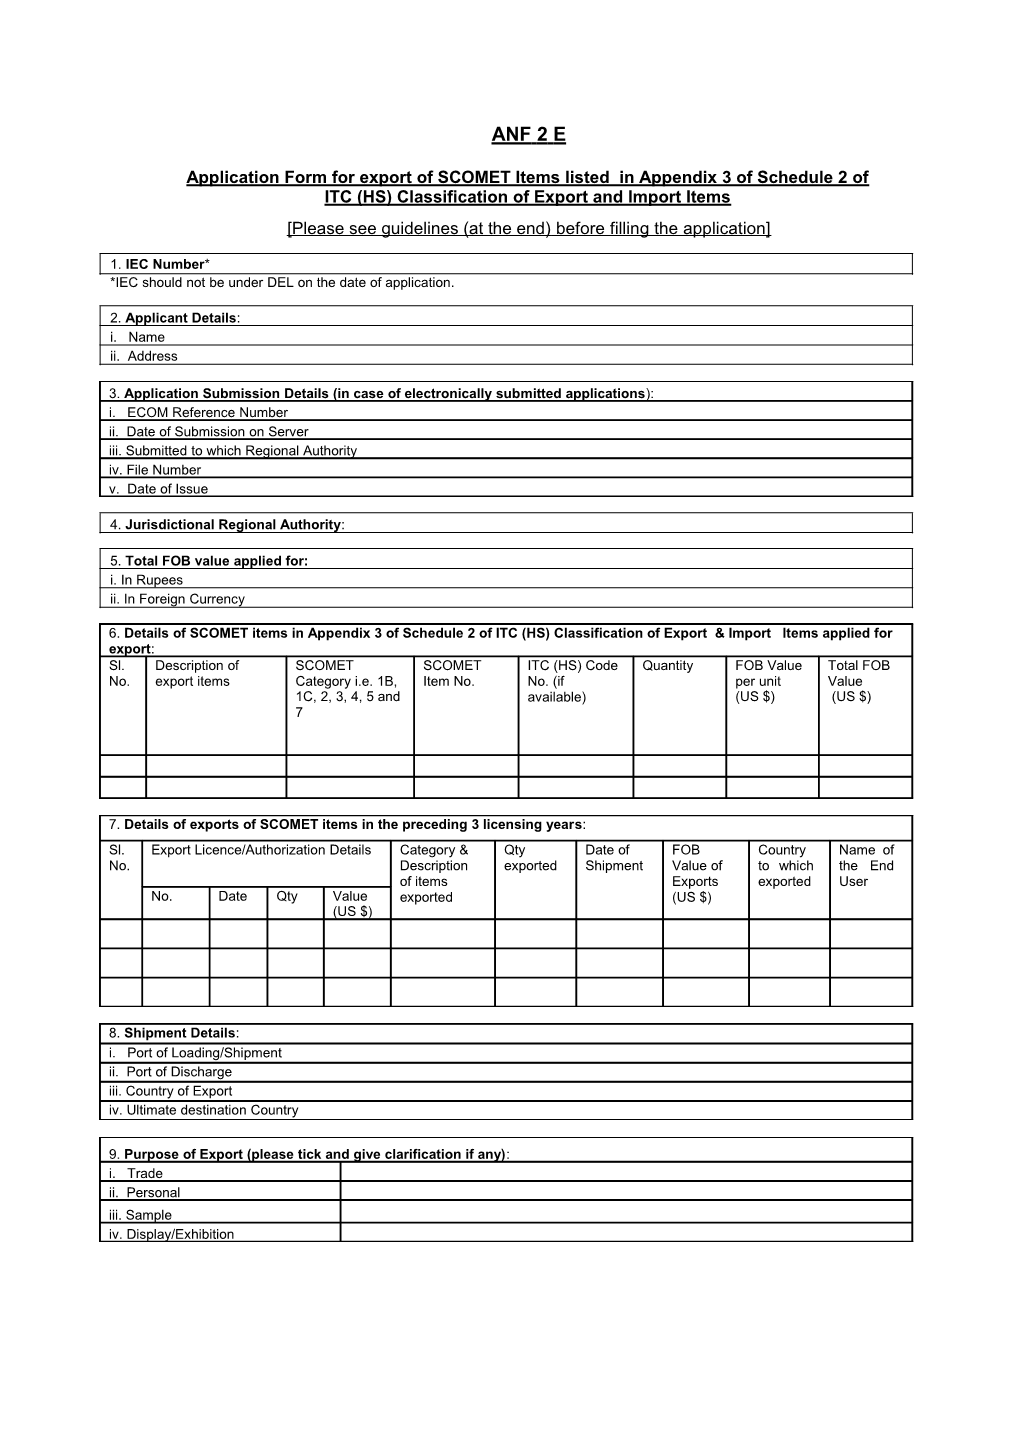 Application Form for Export Licence for SCOMET Items